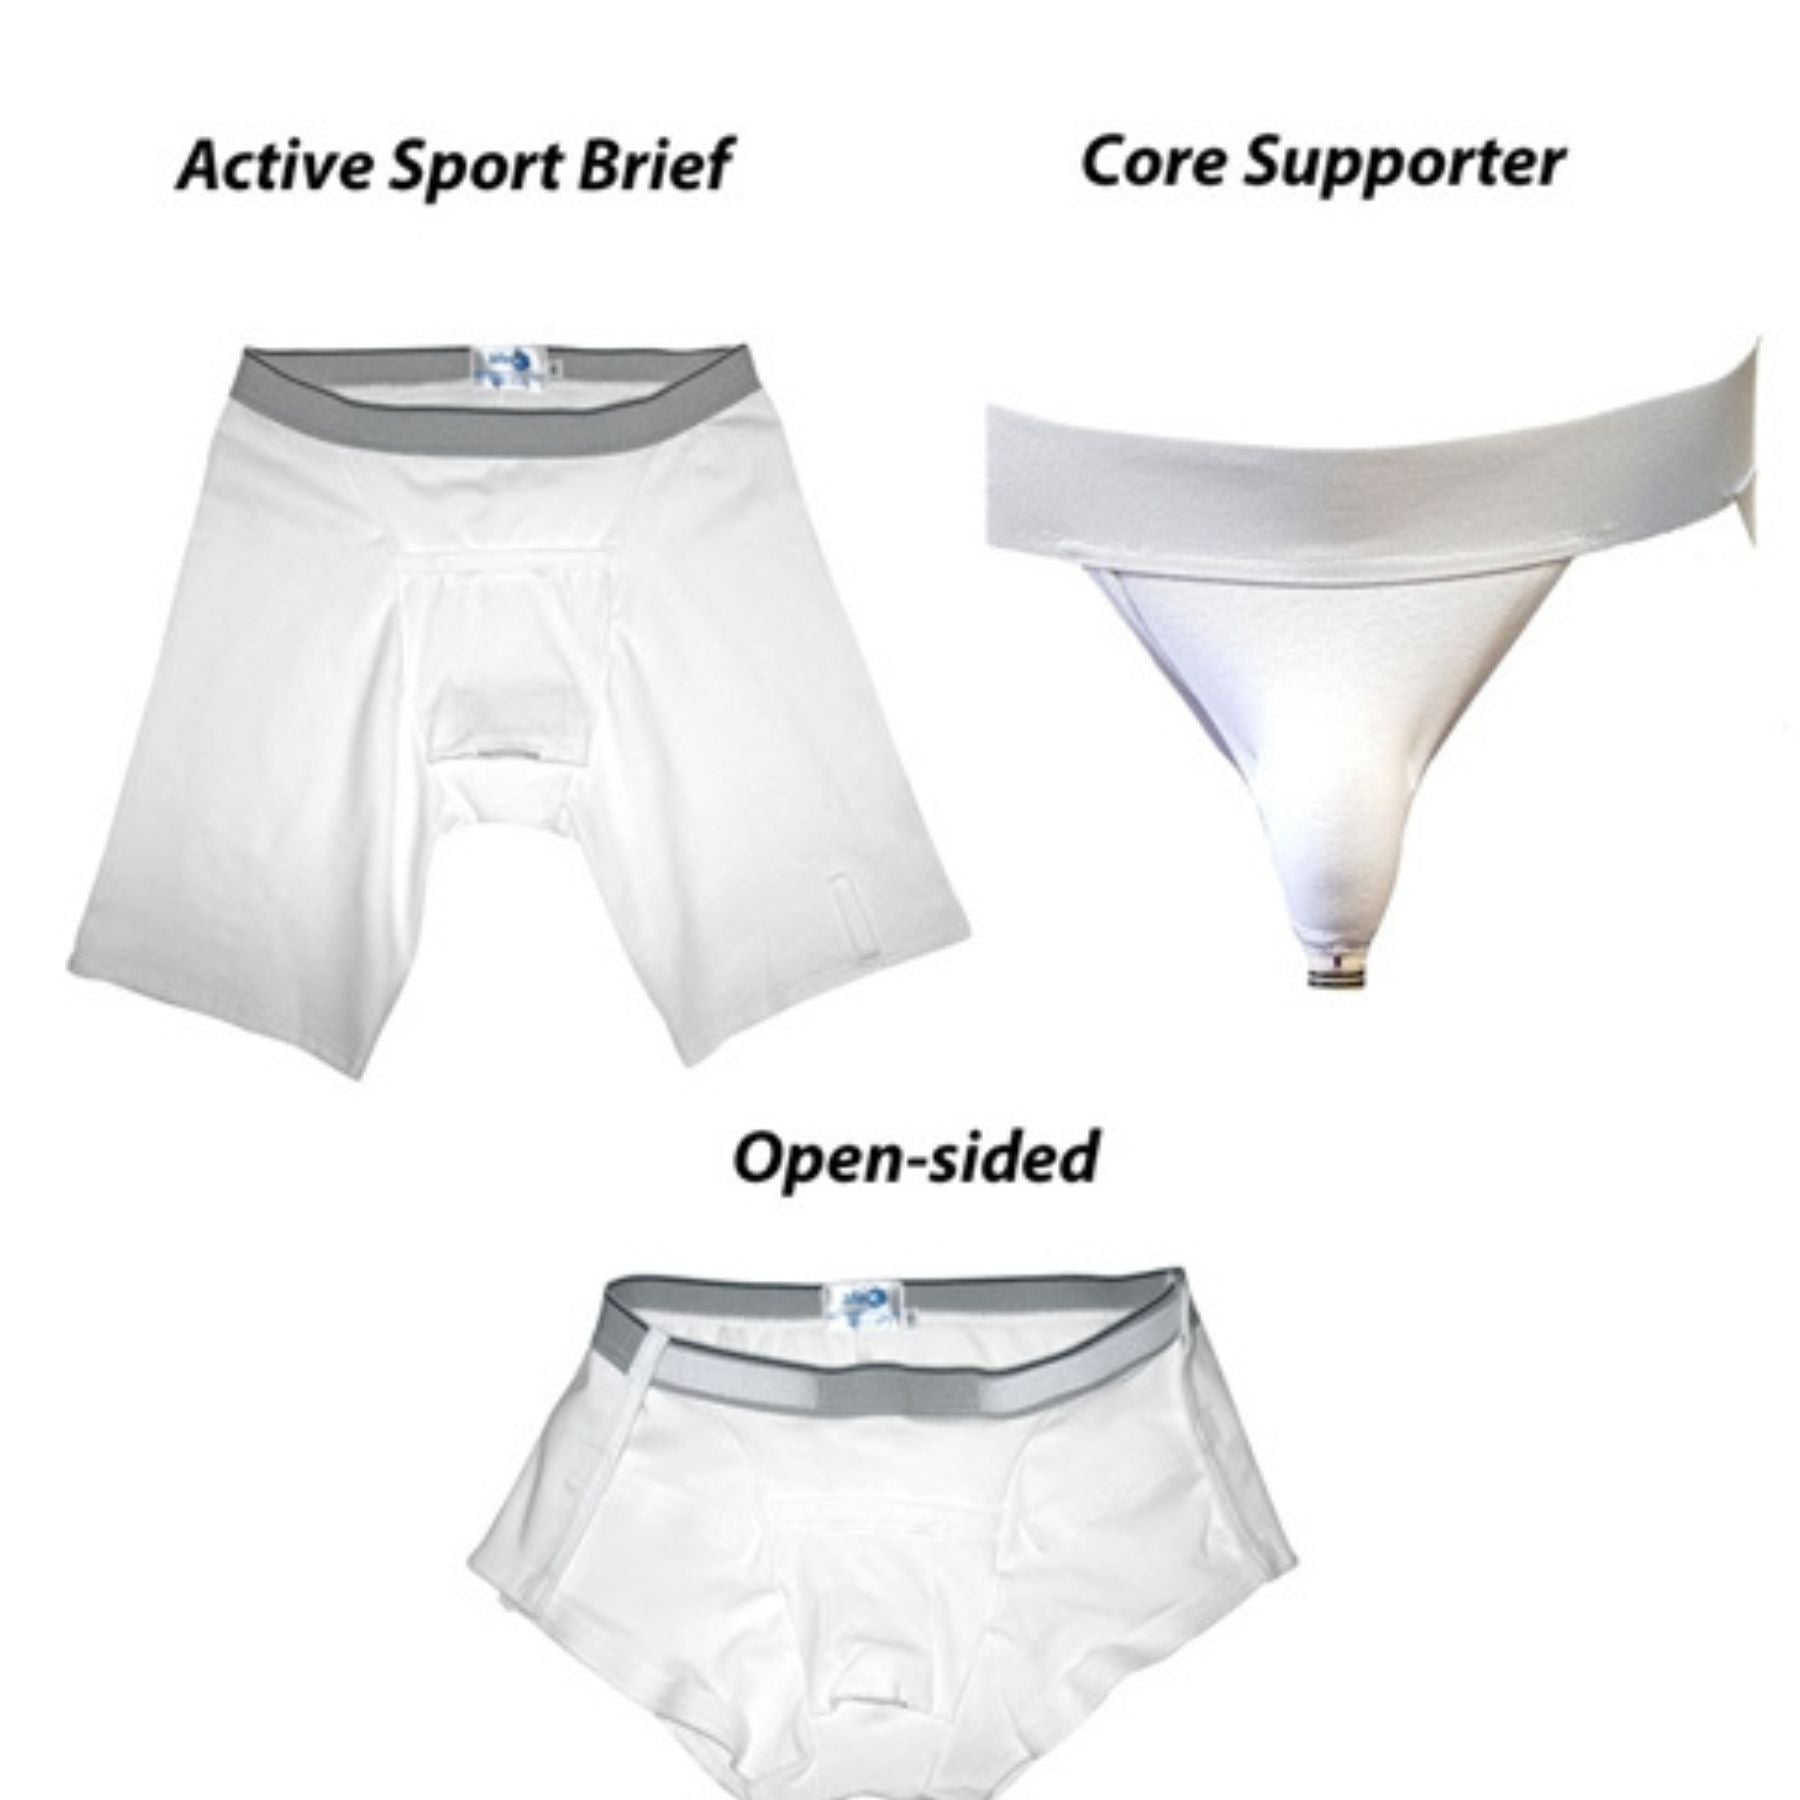 Prevail Per-Fit Adult Briefs — Medsupplynow